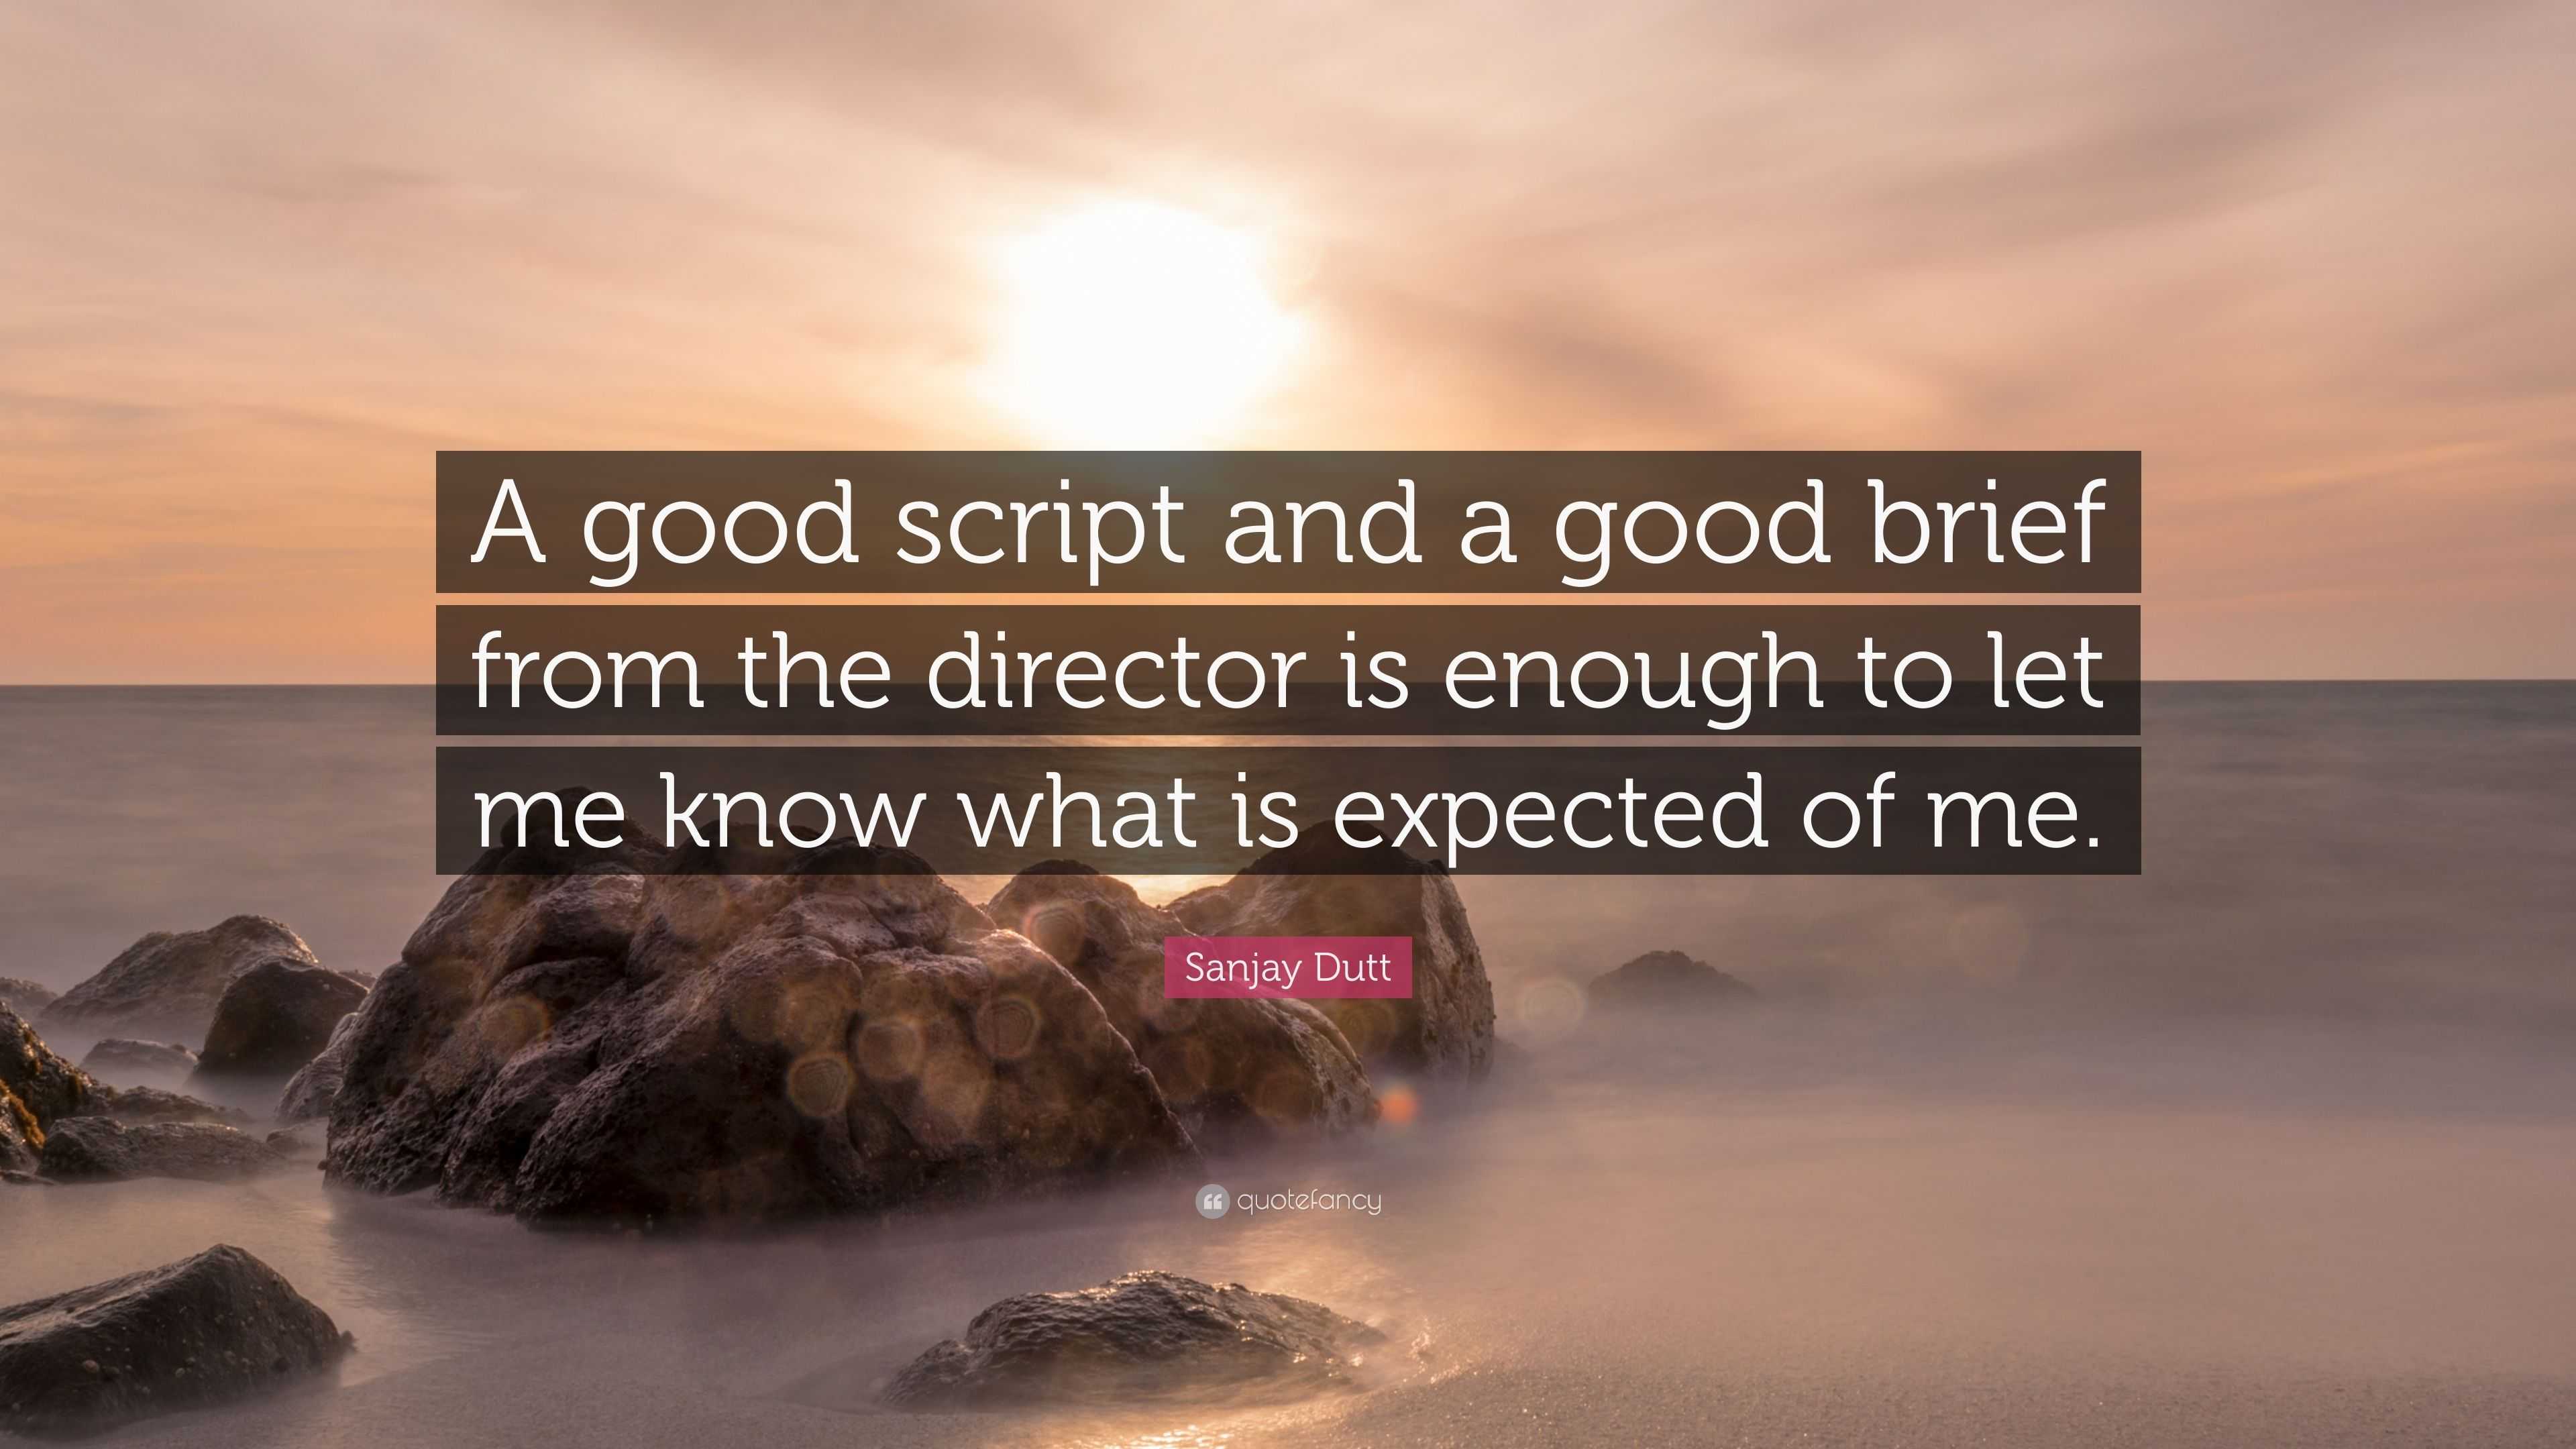 https://quotefancy.com/media/wallpaper/3840x2160/5772370-Sanjay-Dutt-Quote-A-good-script-and-a-good-brief-from-the-director.jpg